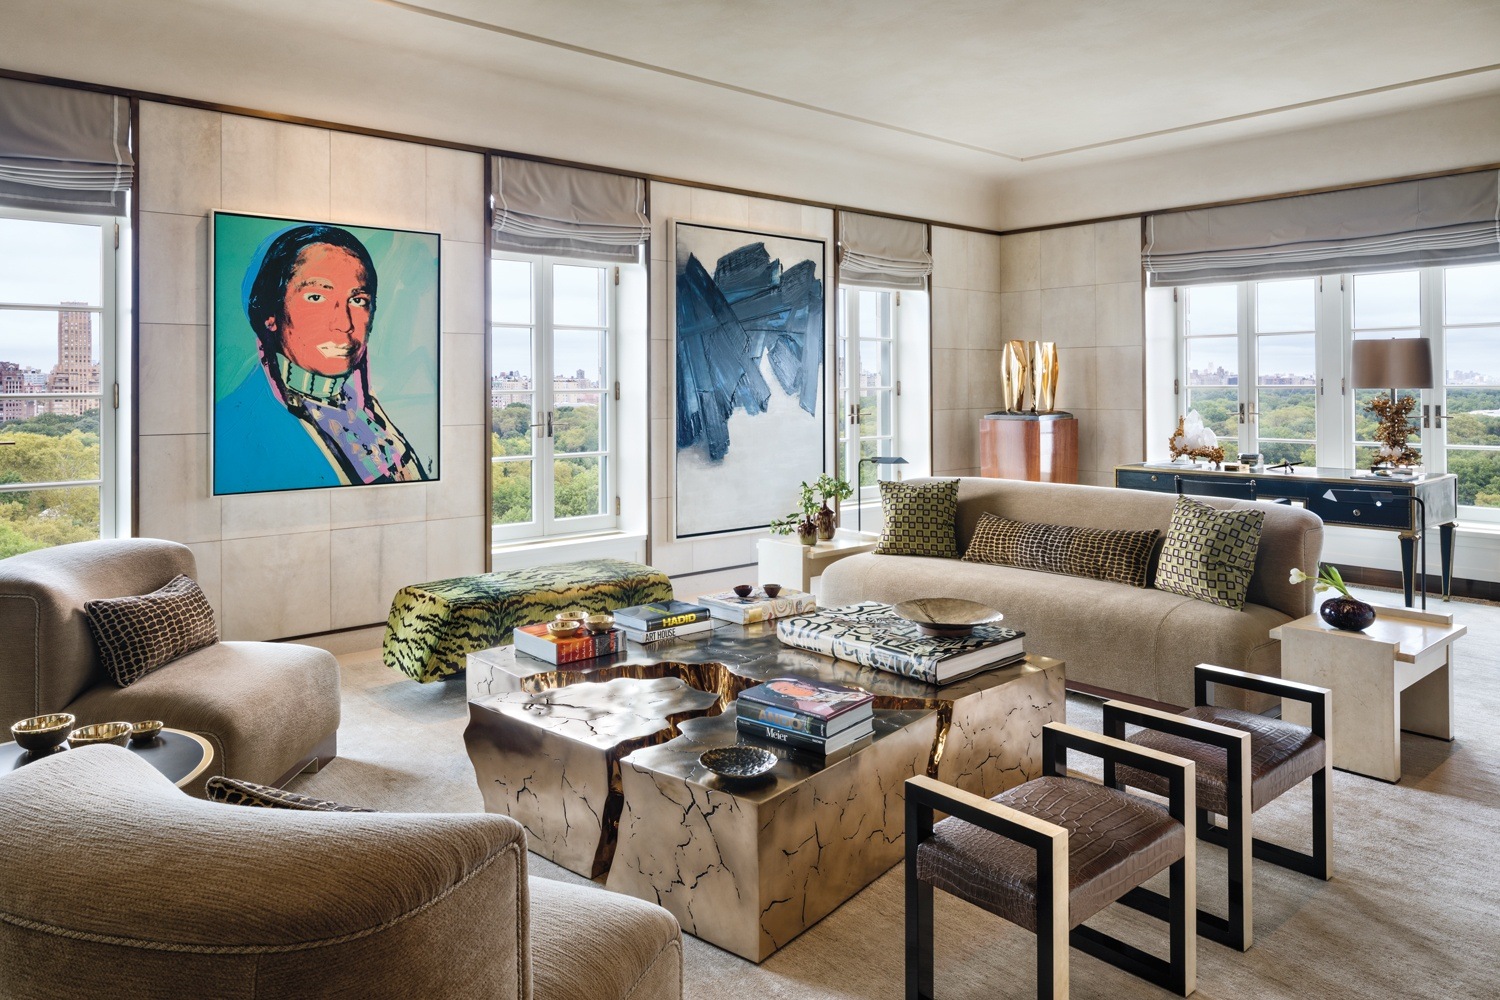 In this living room, designed by Deborah Berke and Christine van Deusen, paintings by Andy Warhol and Pierre Soulages overlook a seating area that includes pieces by Achille Salvagni, Jacques Adnet, and Based Upon. Also in the room are a Barbara Hepworth sculpture, Marc du Plantier desk, and Claude Boeltz lamp.